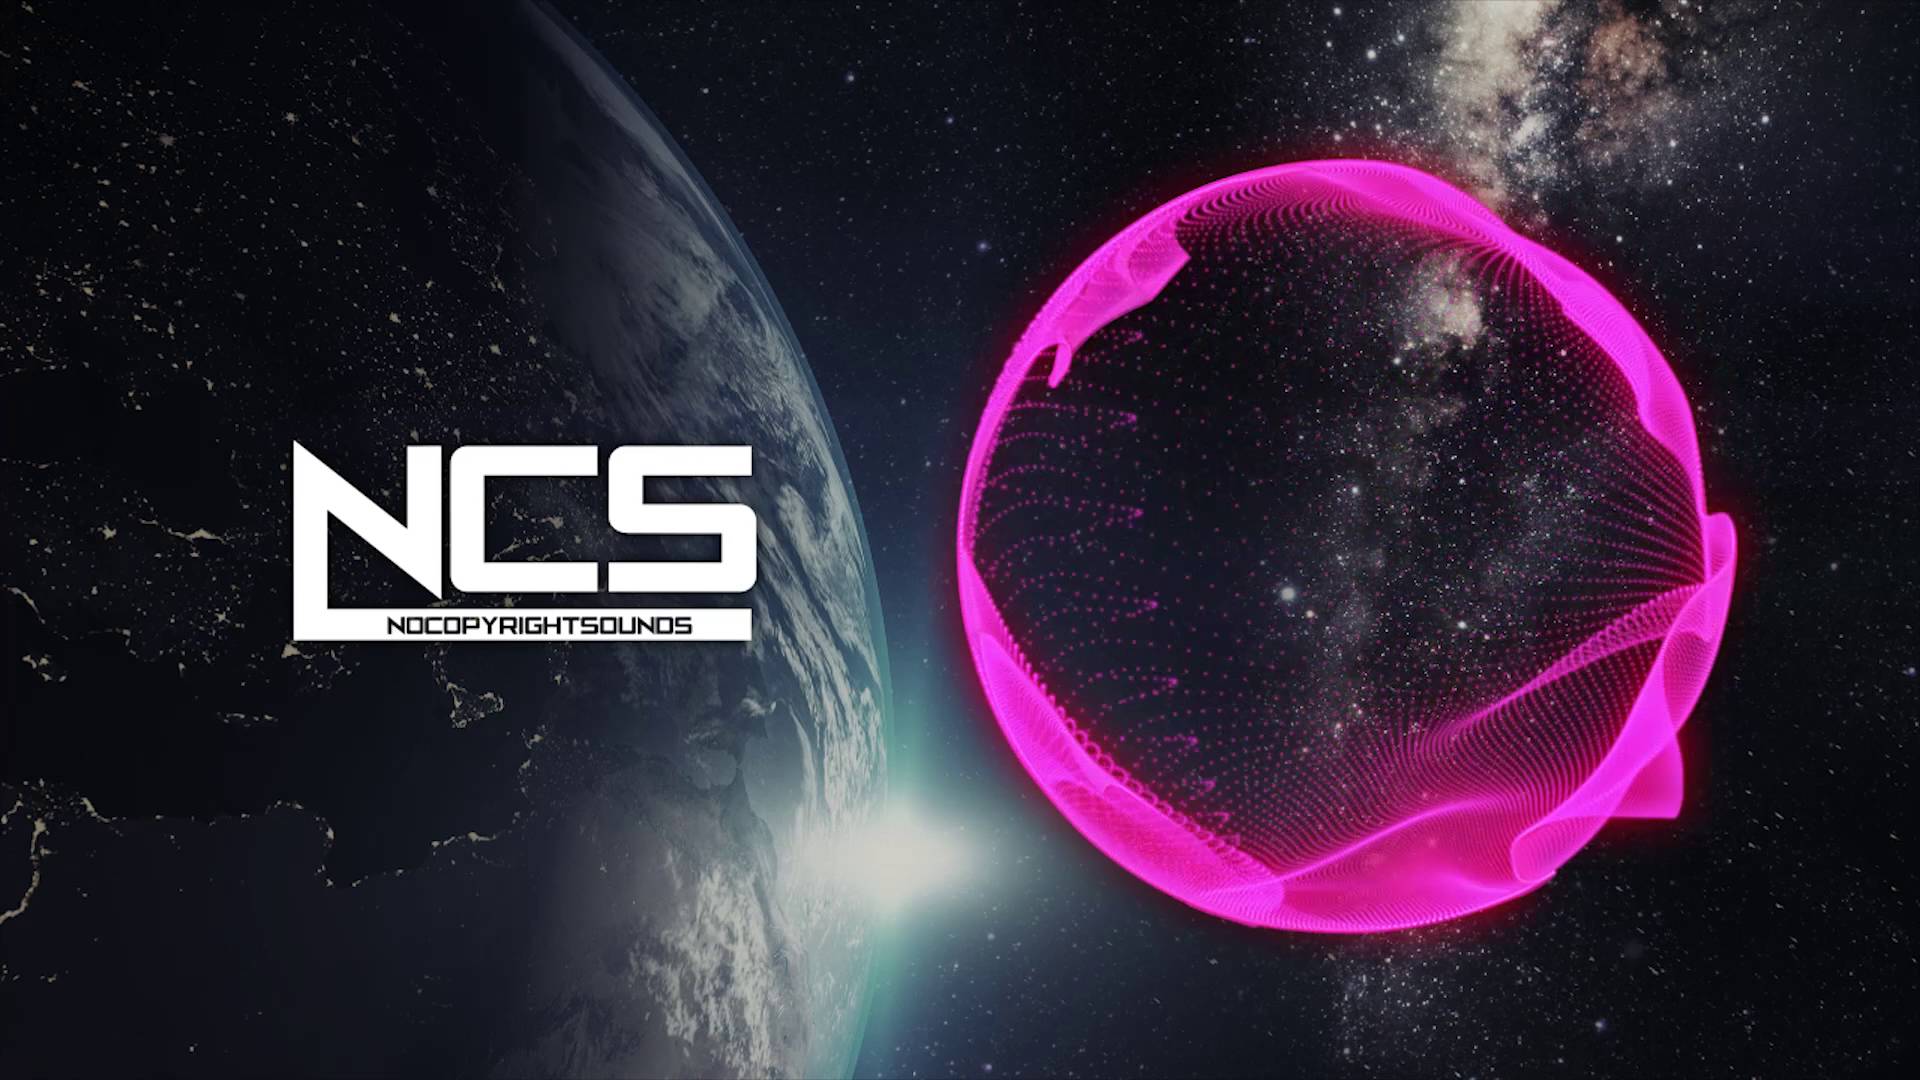 download ncs background music